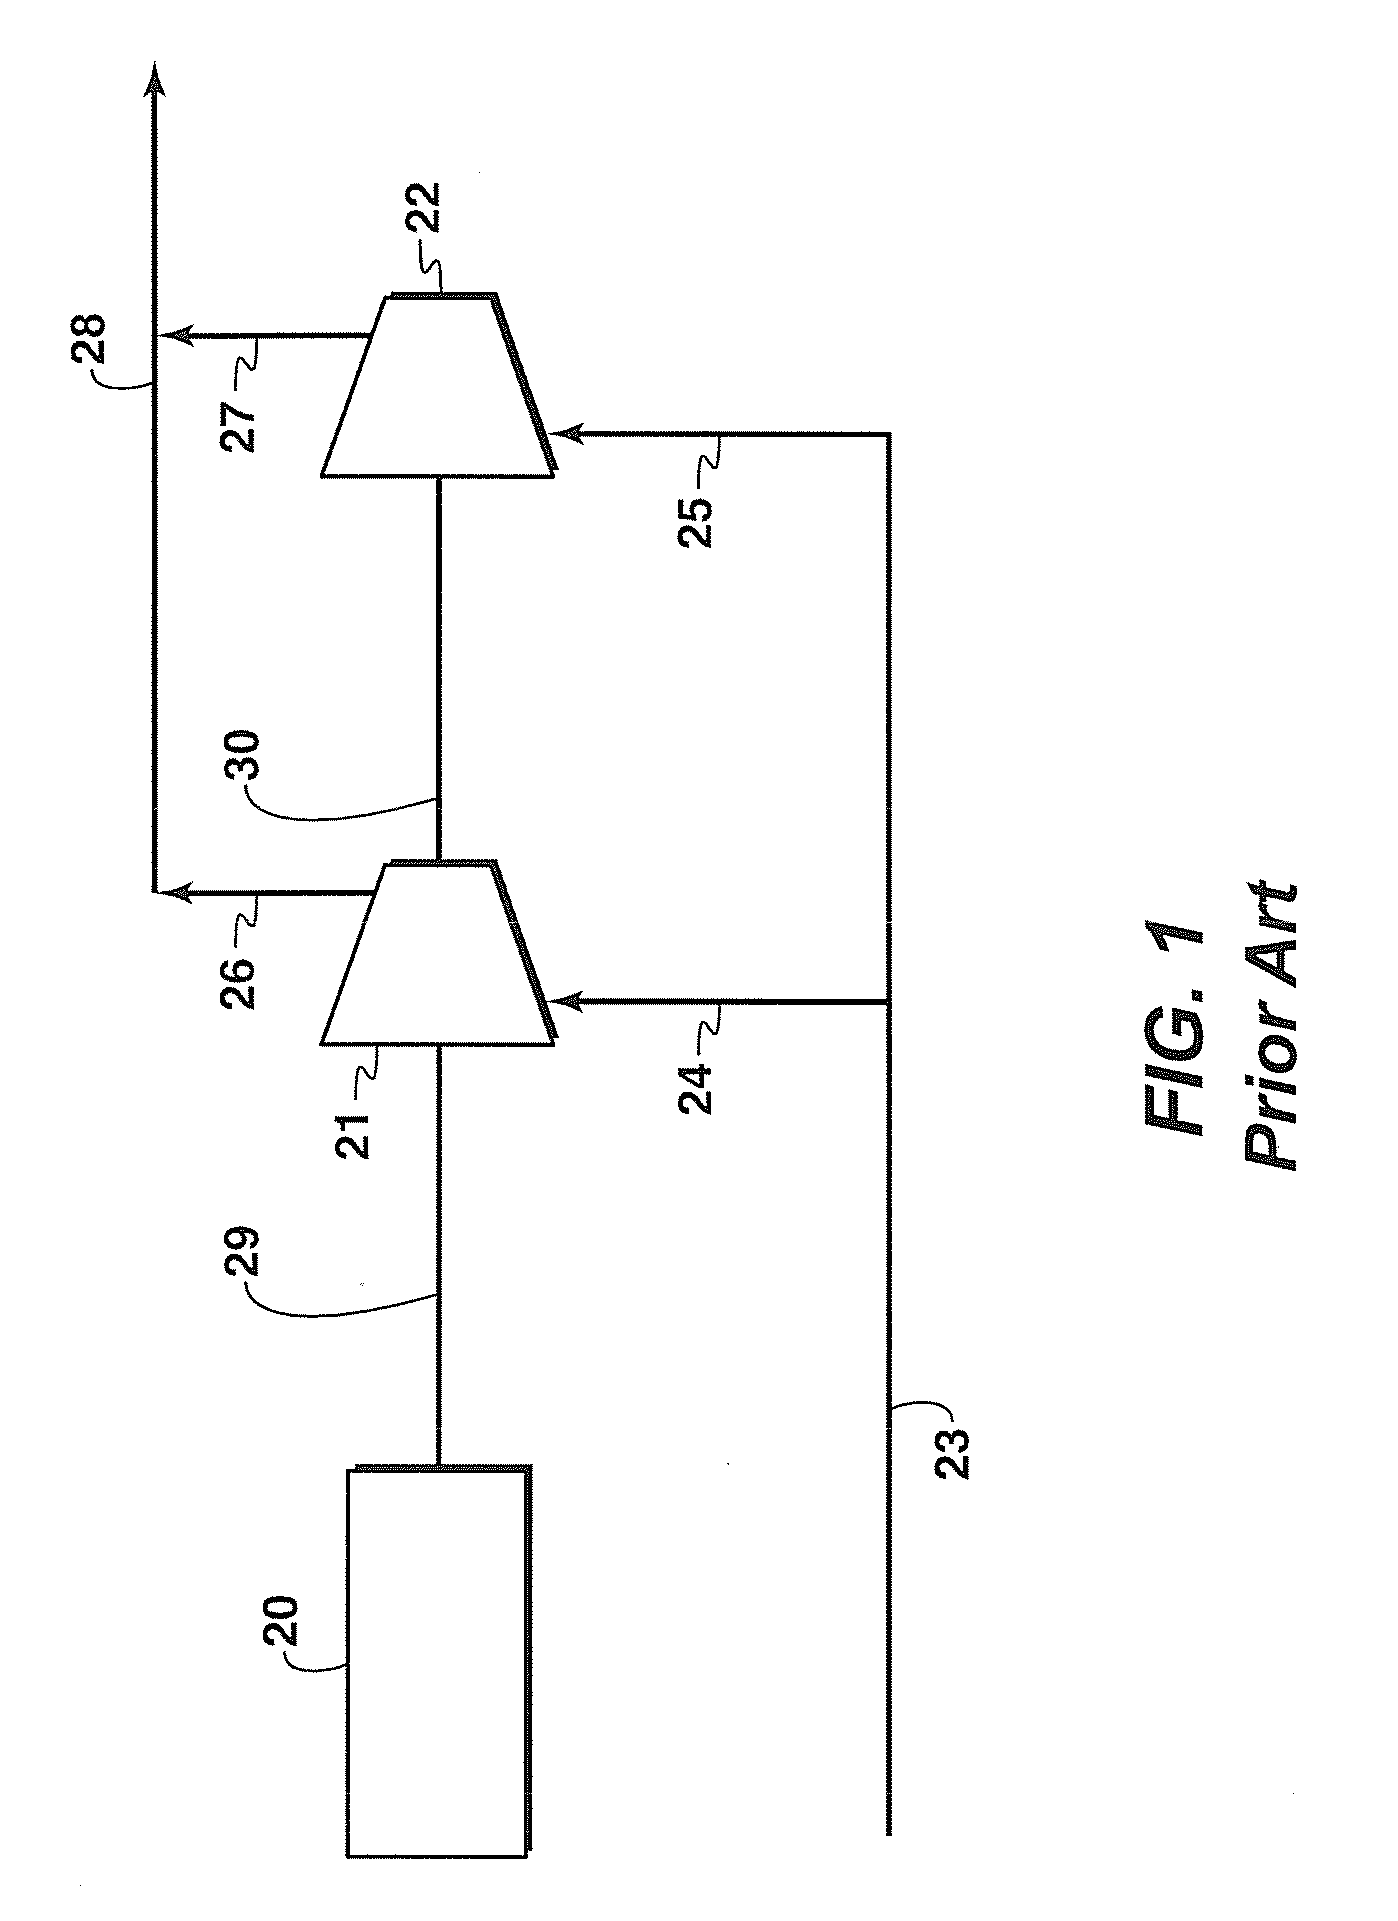 Parallel dynamic compressor arrangement and methods related thereto